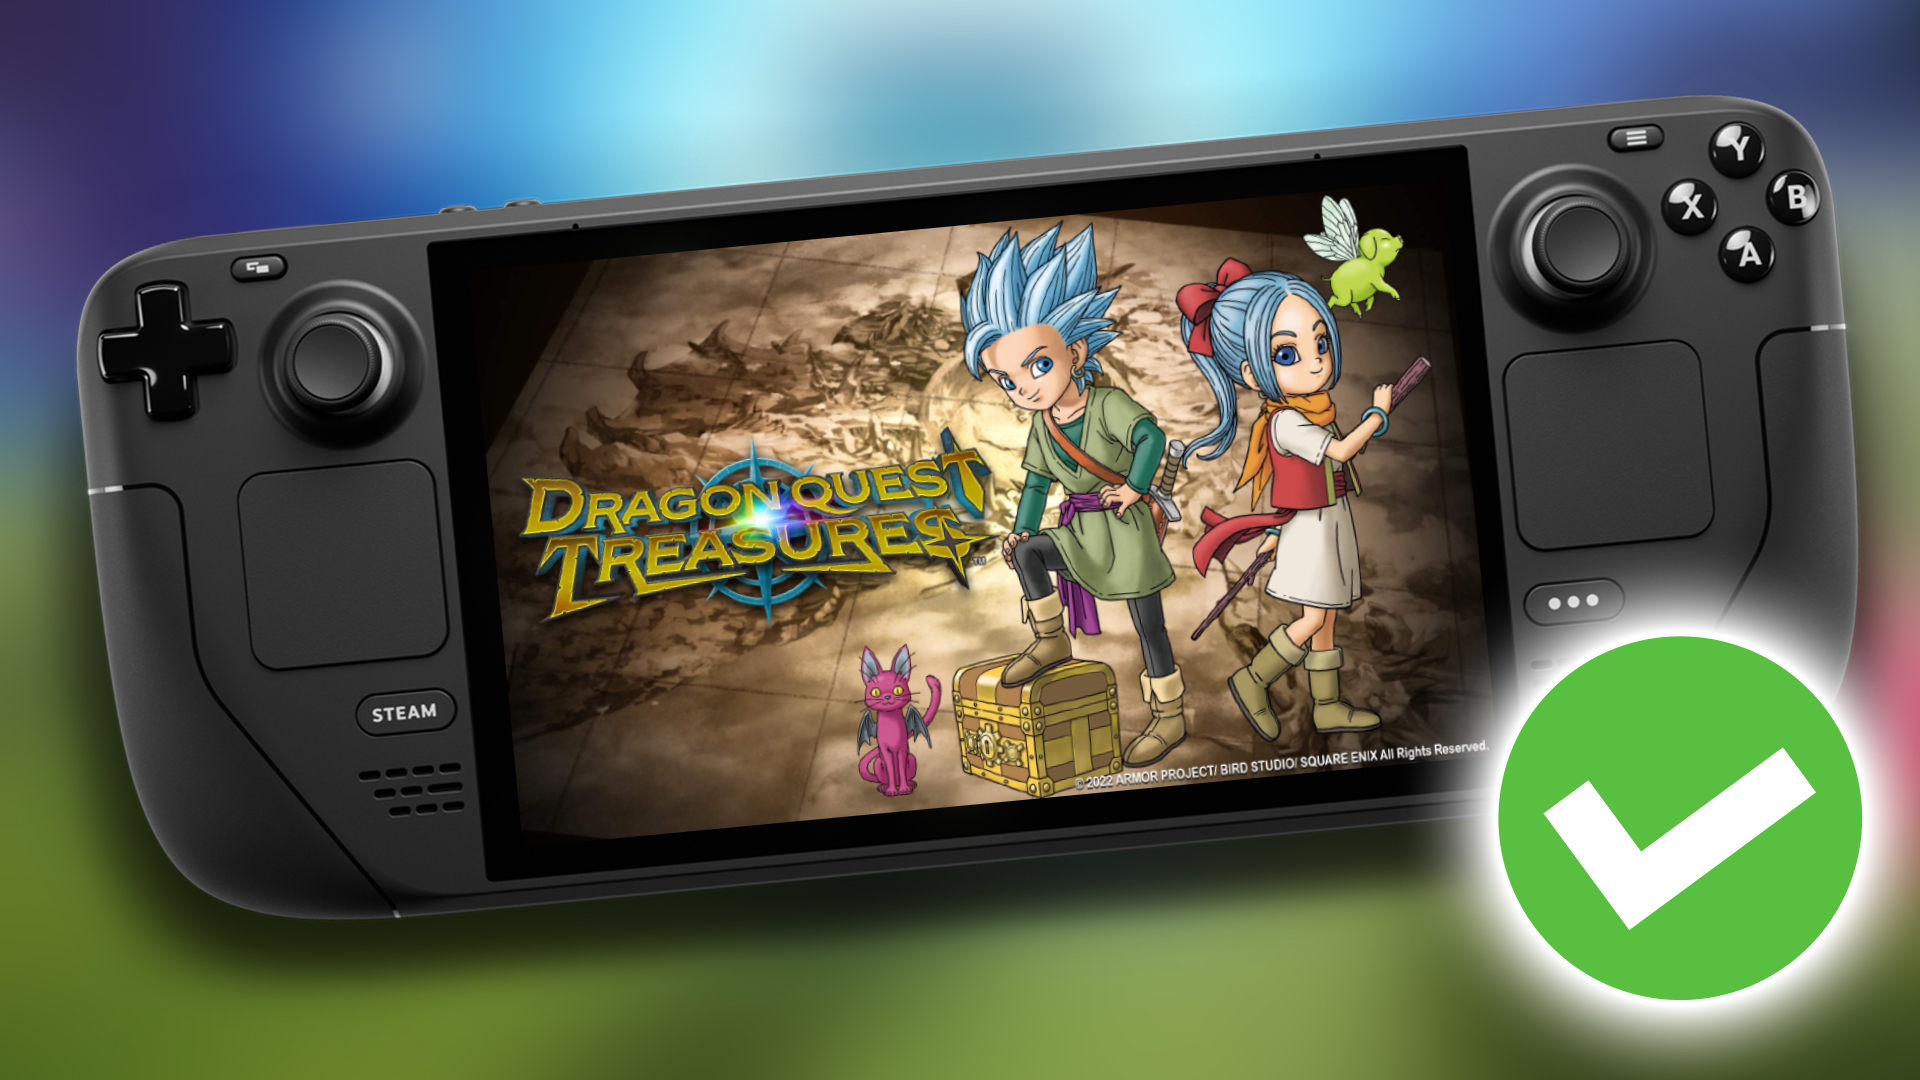 Dragon Quest Treasures Is Officially Verified on Steam Deck